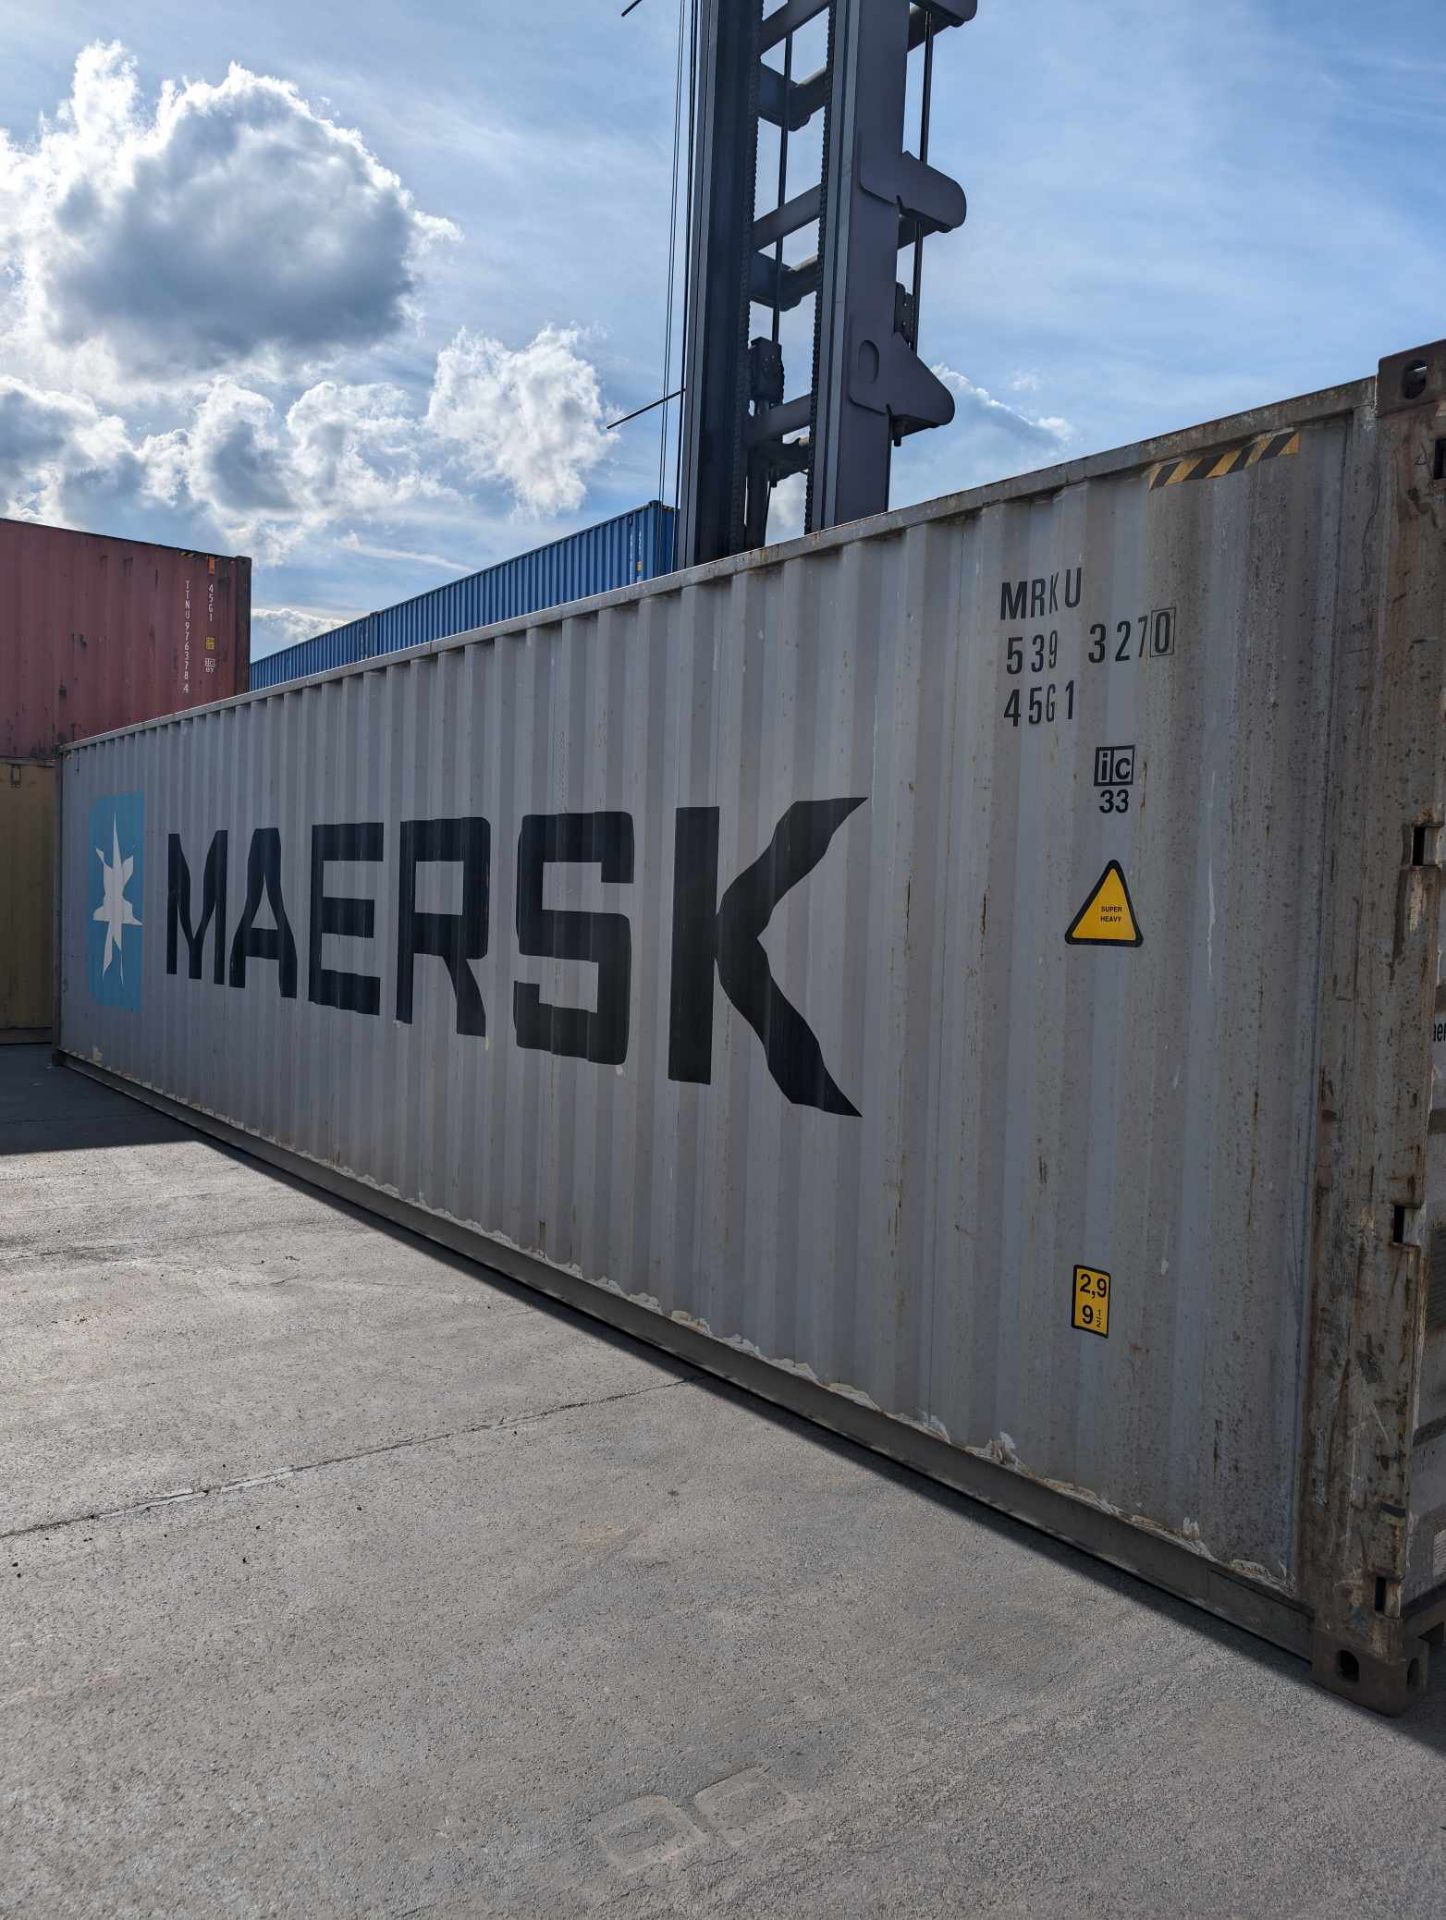 20x 40ft high cube containers – Cargo-worthy condition – Location: WS Transportation, LS24 9SE